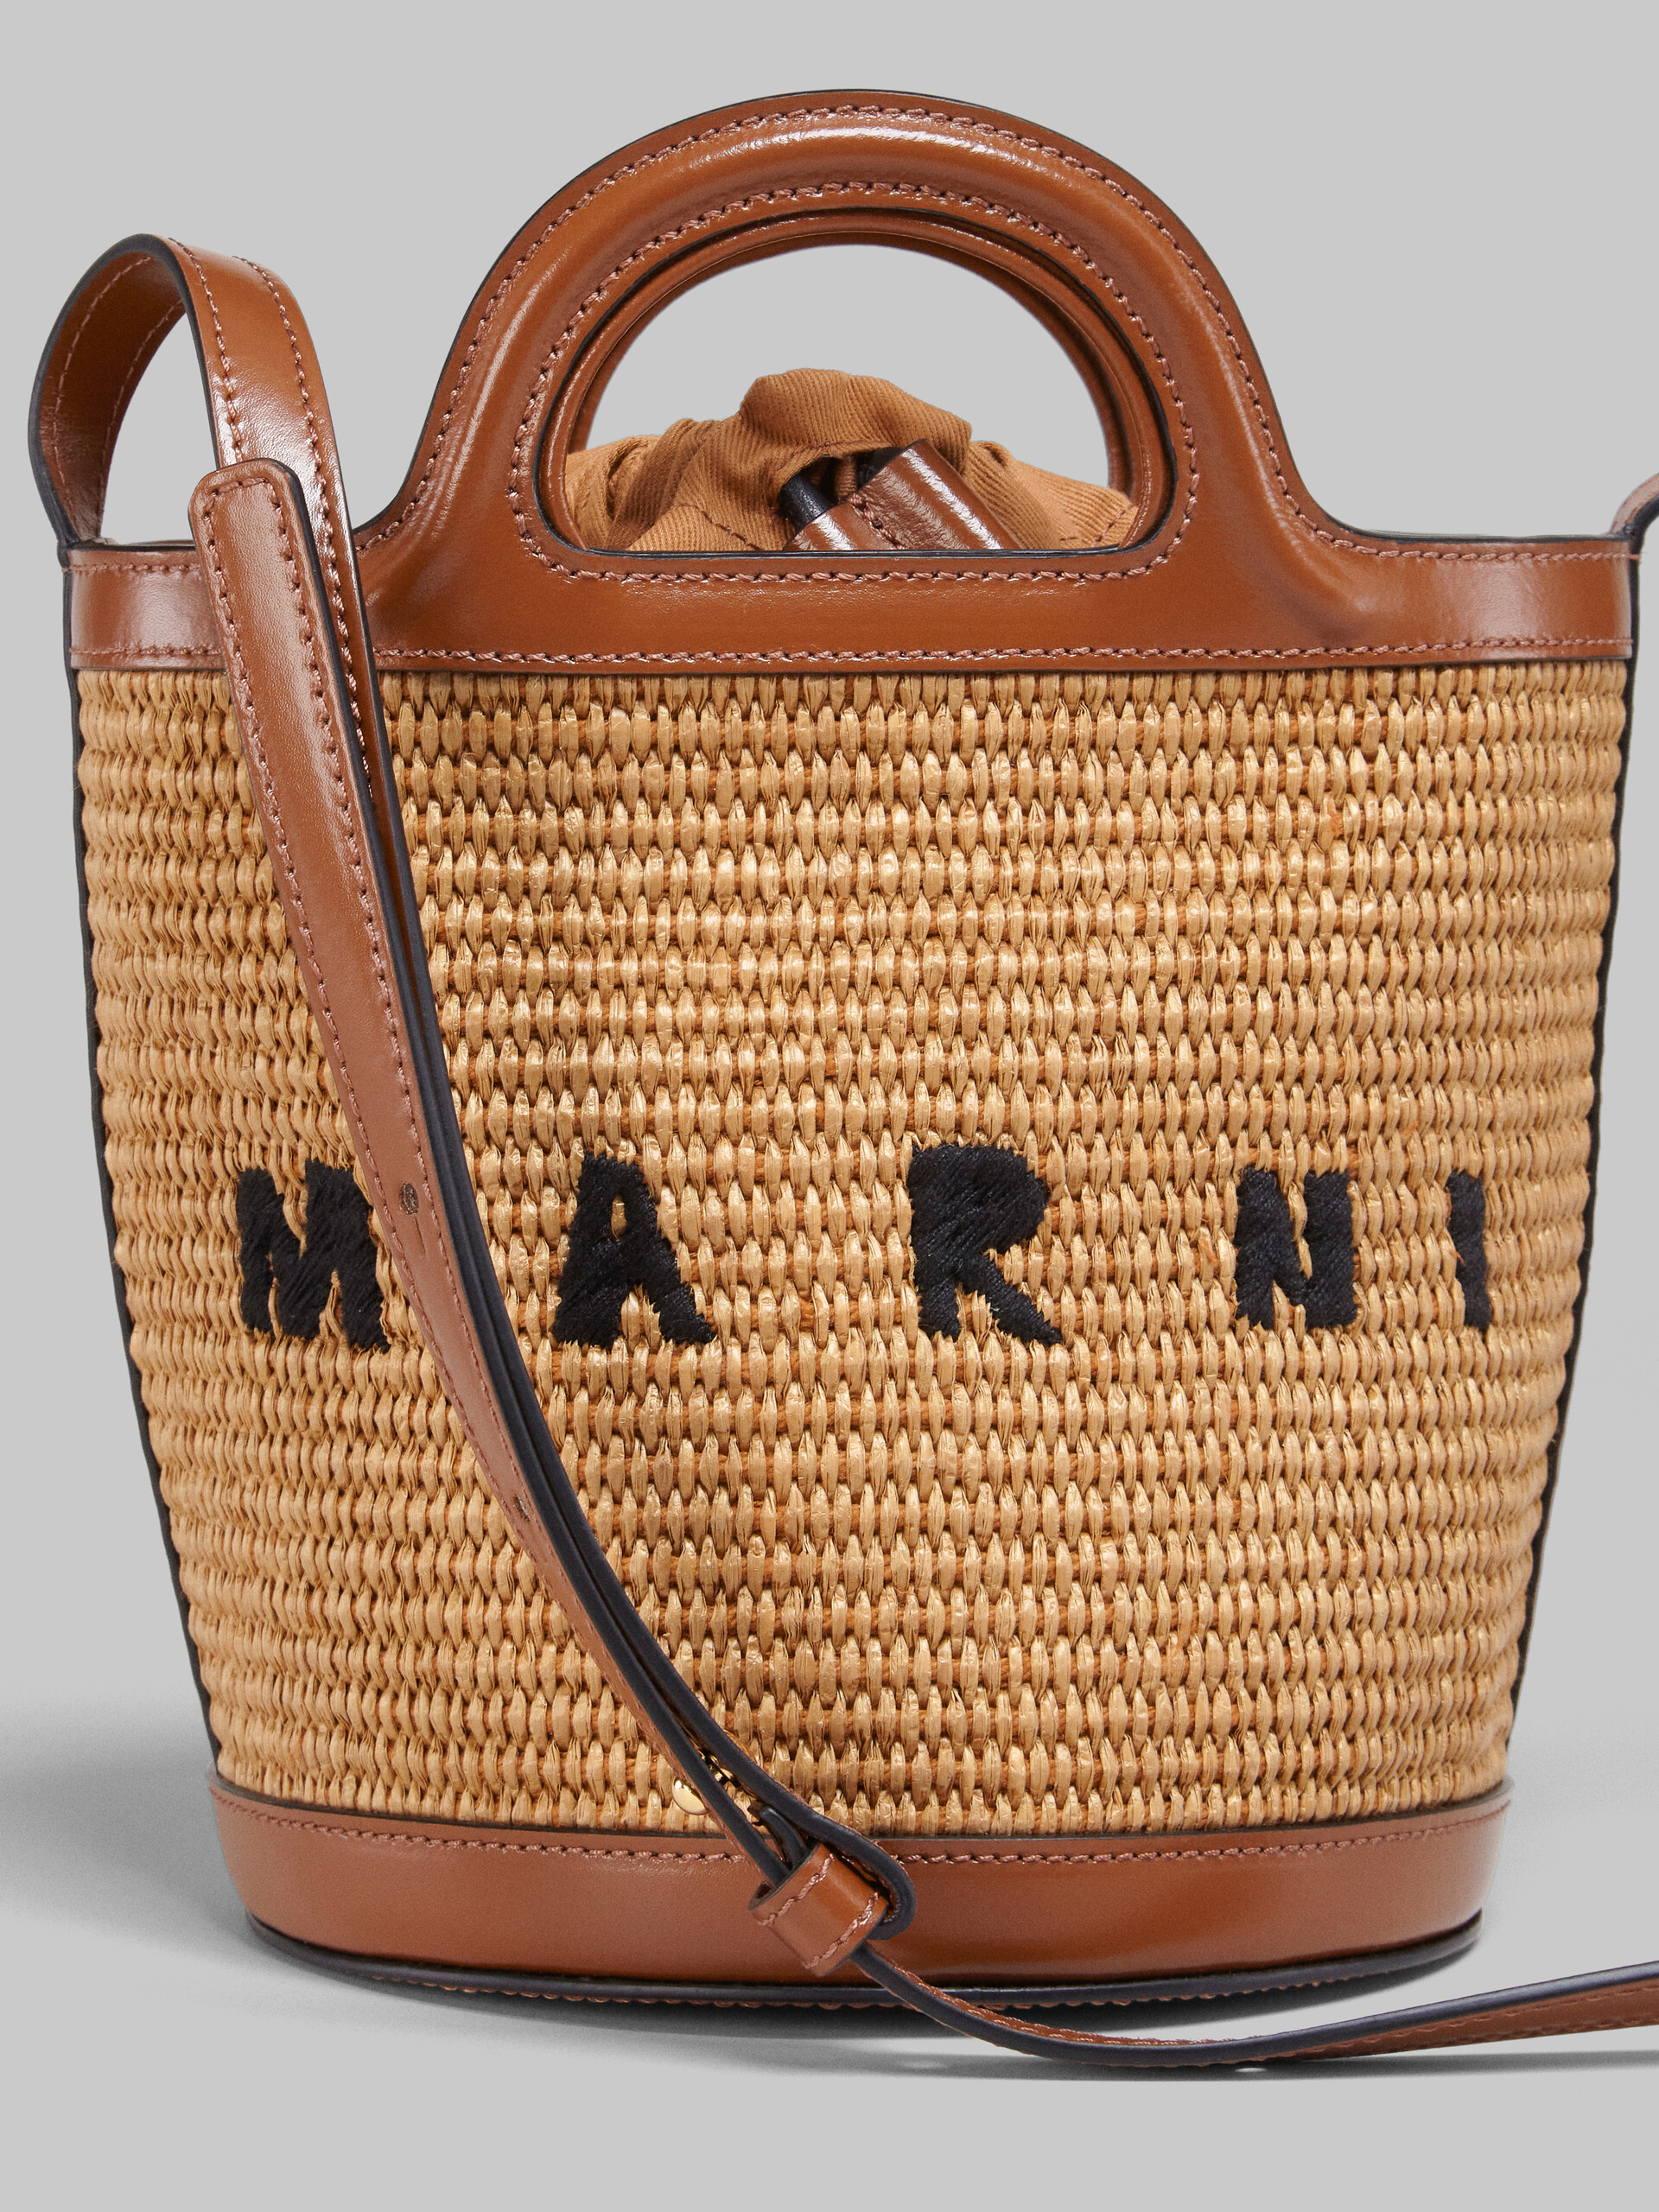 Tropicalia Small Bucket Bag in brown leather and raffia-effect fabric - Shoulder Bag - Image 4